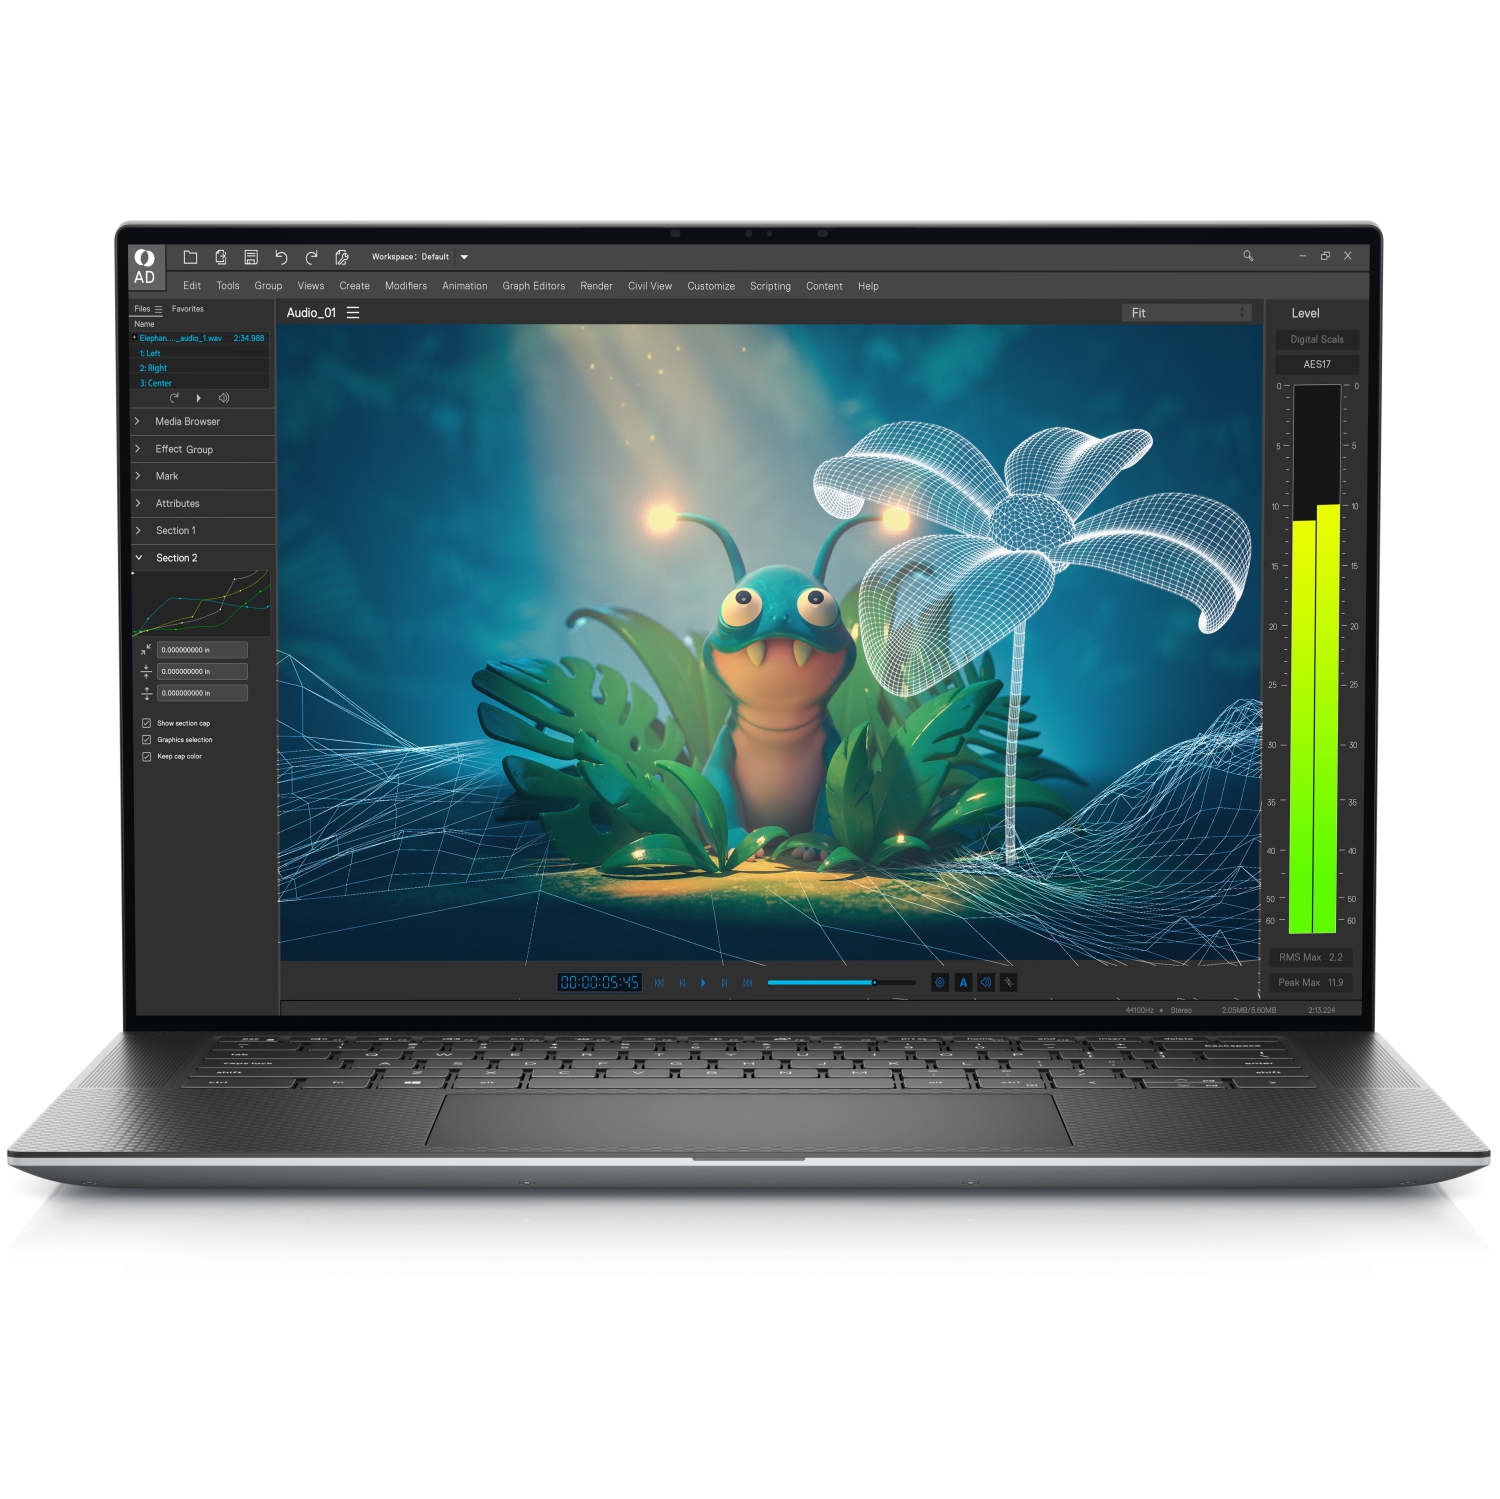 Refurbished (Excellent) – Dell Precision 5000 5570 Workstation Laptop (2022) | 15.6" 4K Touch | Core i9 - 1TB SSD - 32GB RAM - RTX A2000 | 14 Cores @ 5 GHz - 12th Gen CPU